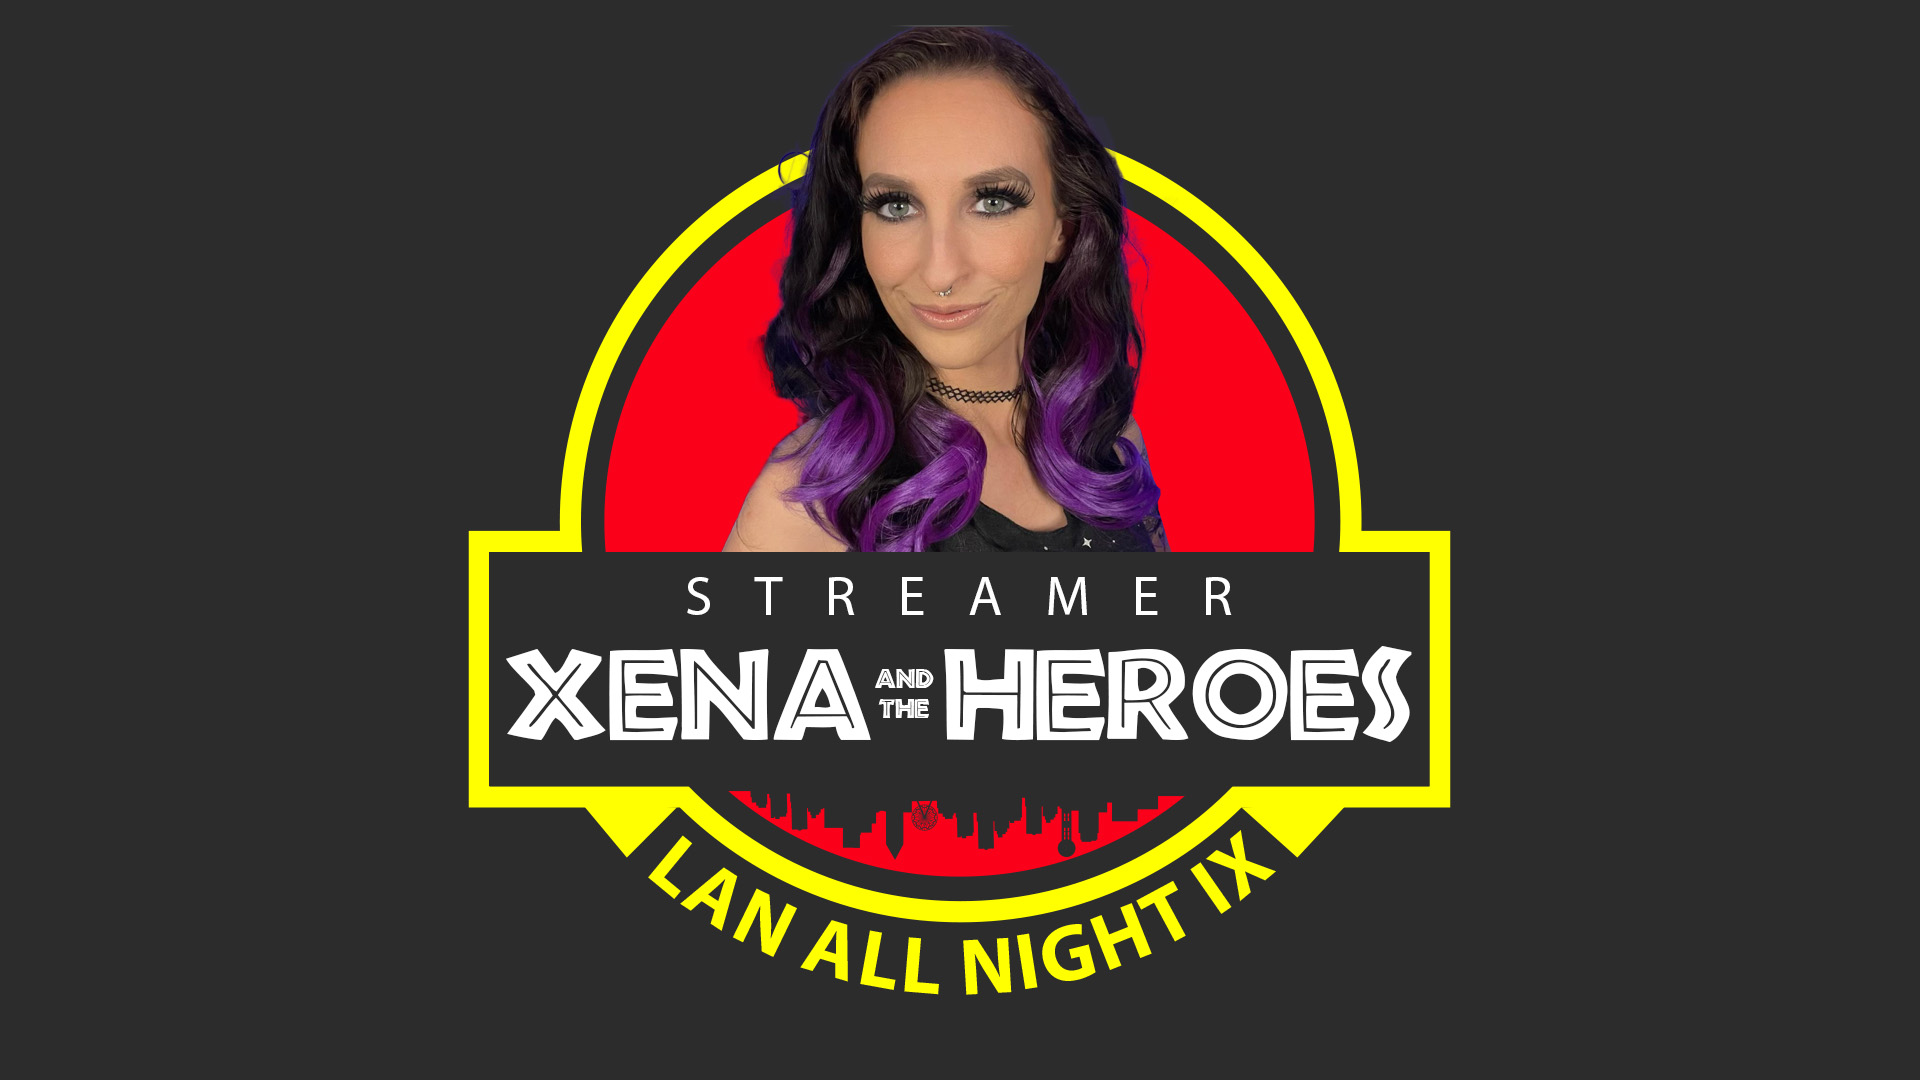 Streamer - Xena and the Heroes